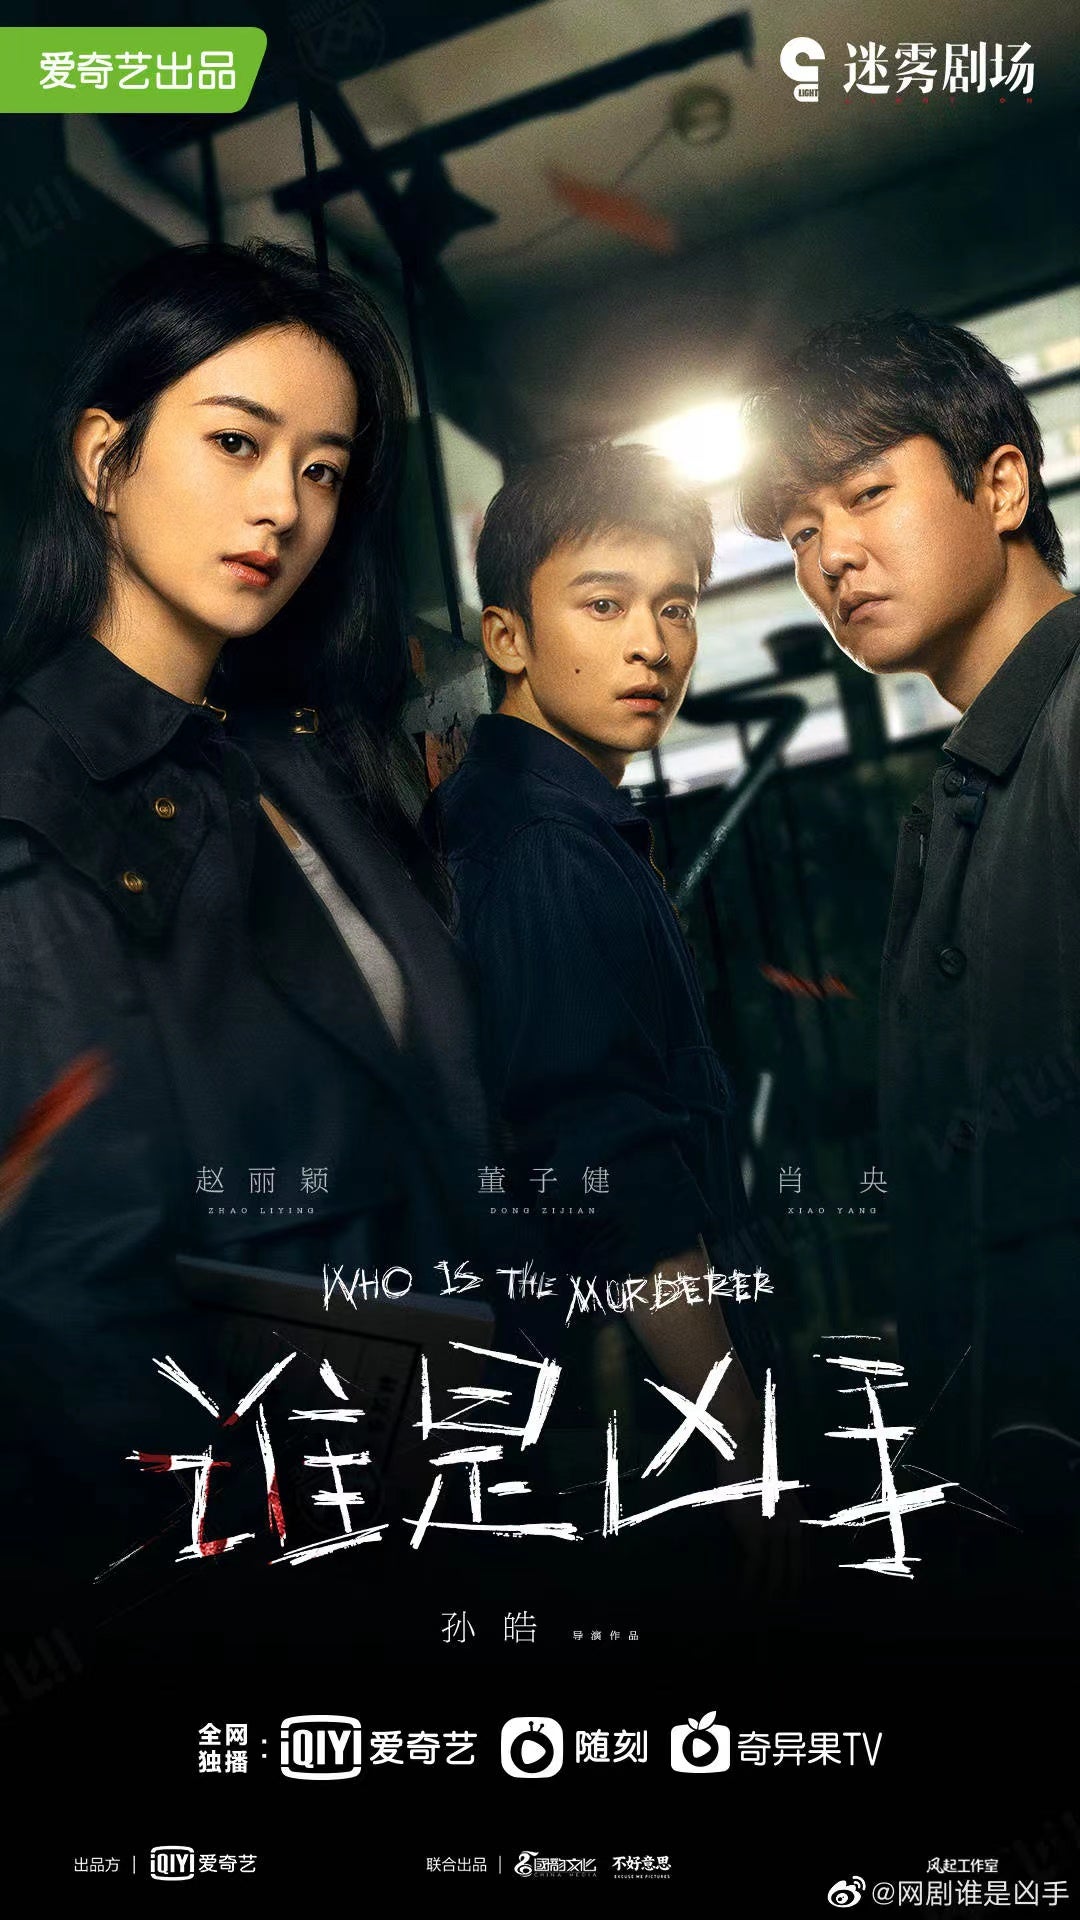 TV ratings for Who Is The Murderer (谁是凶手) in New Zealand. iqiyi TV series